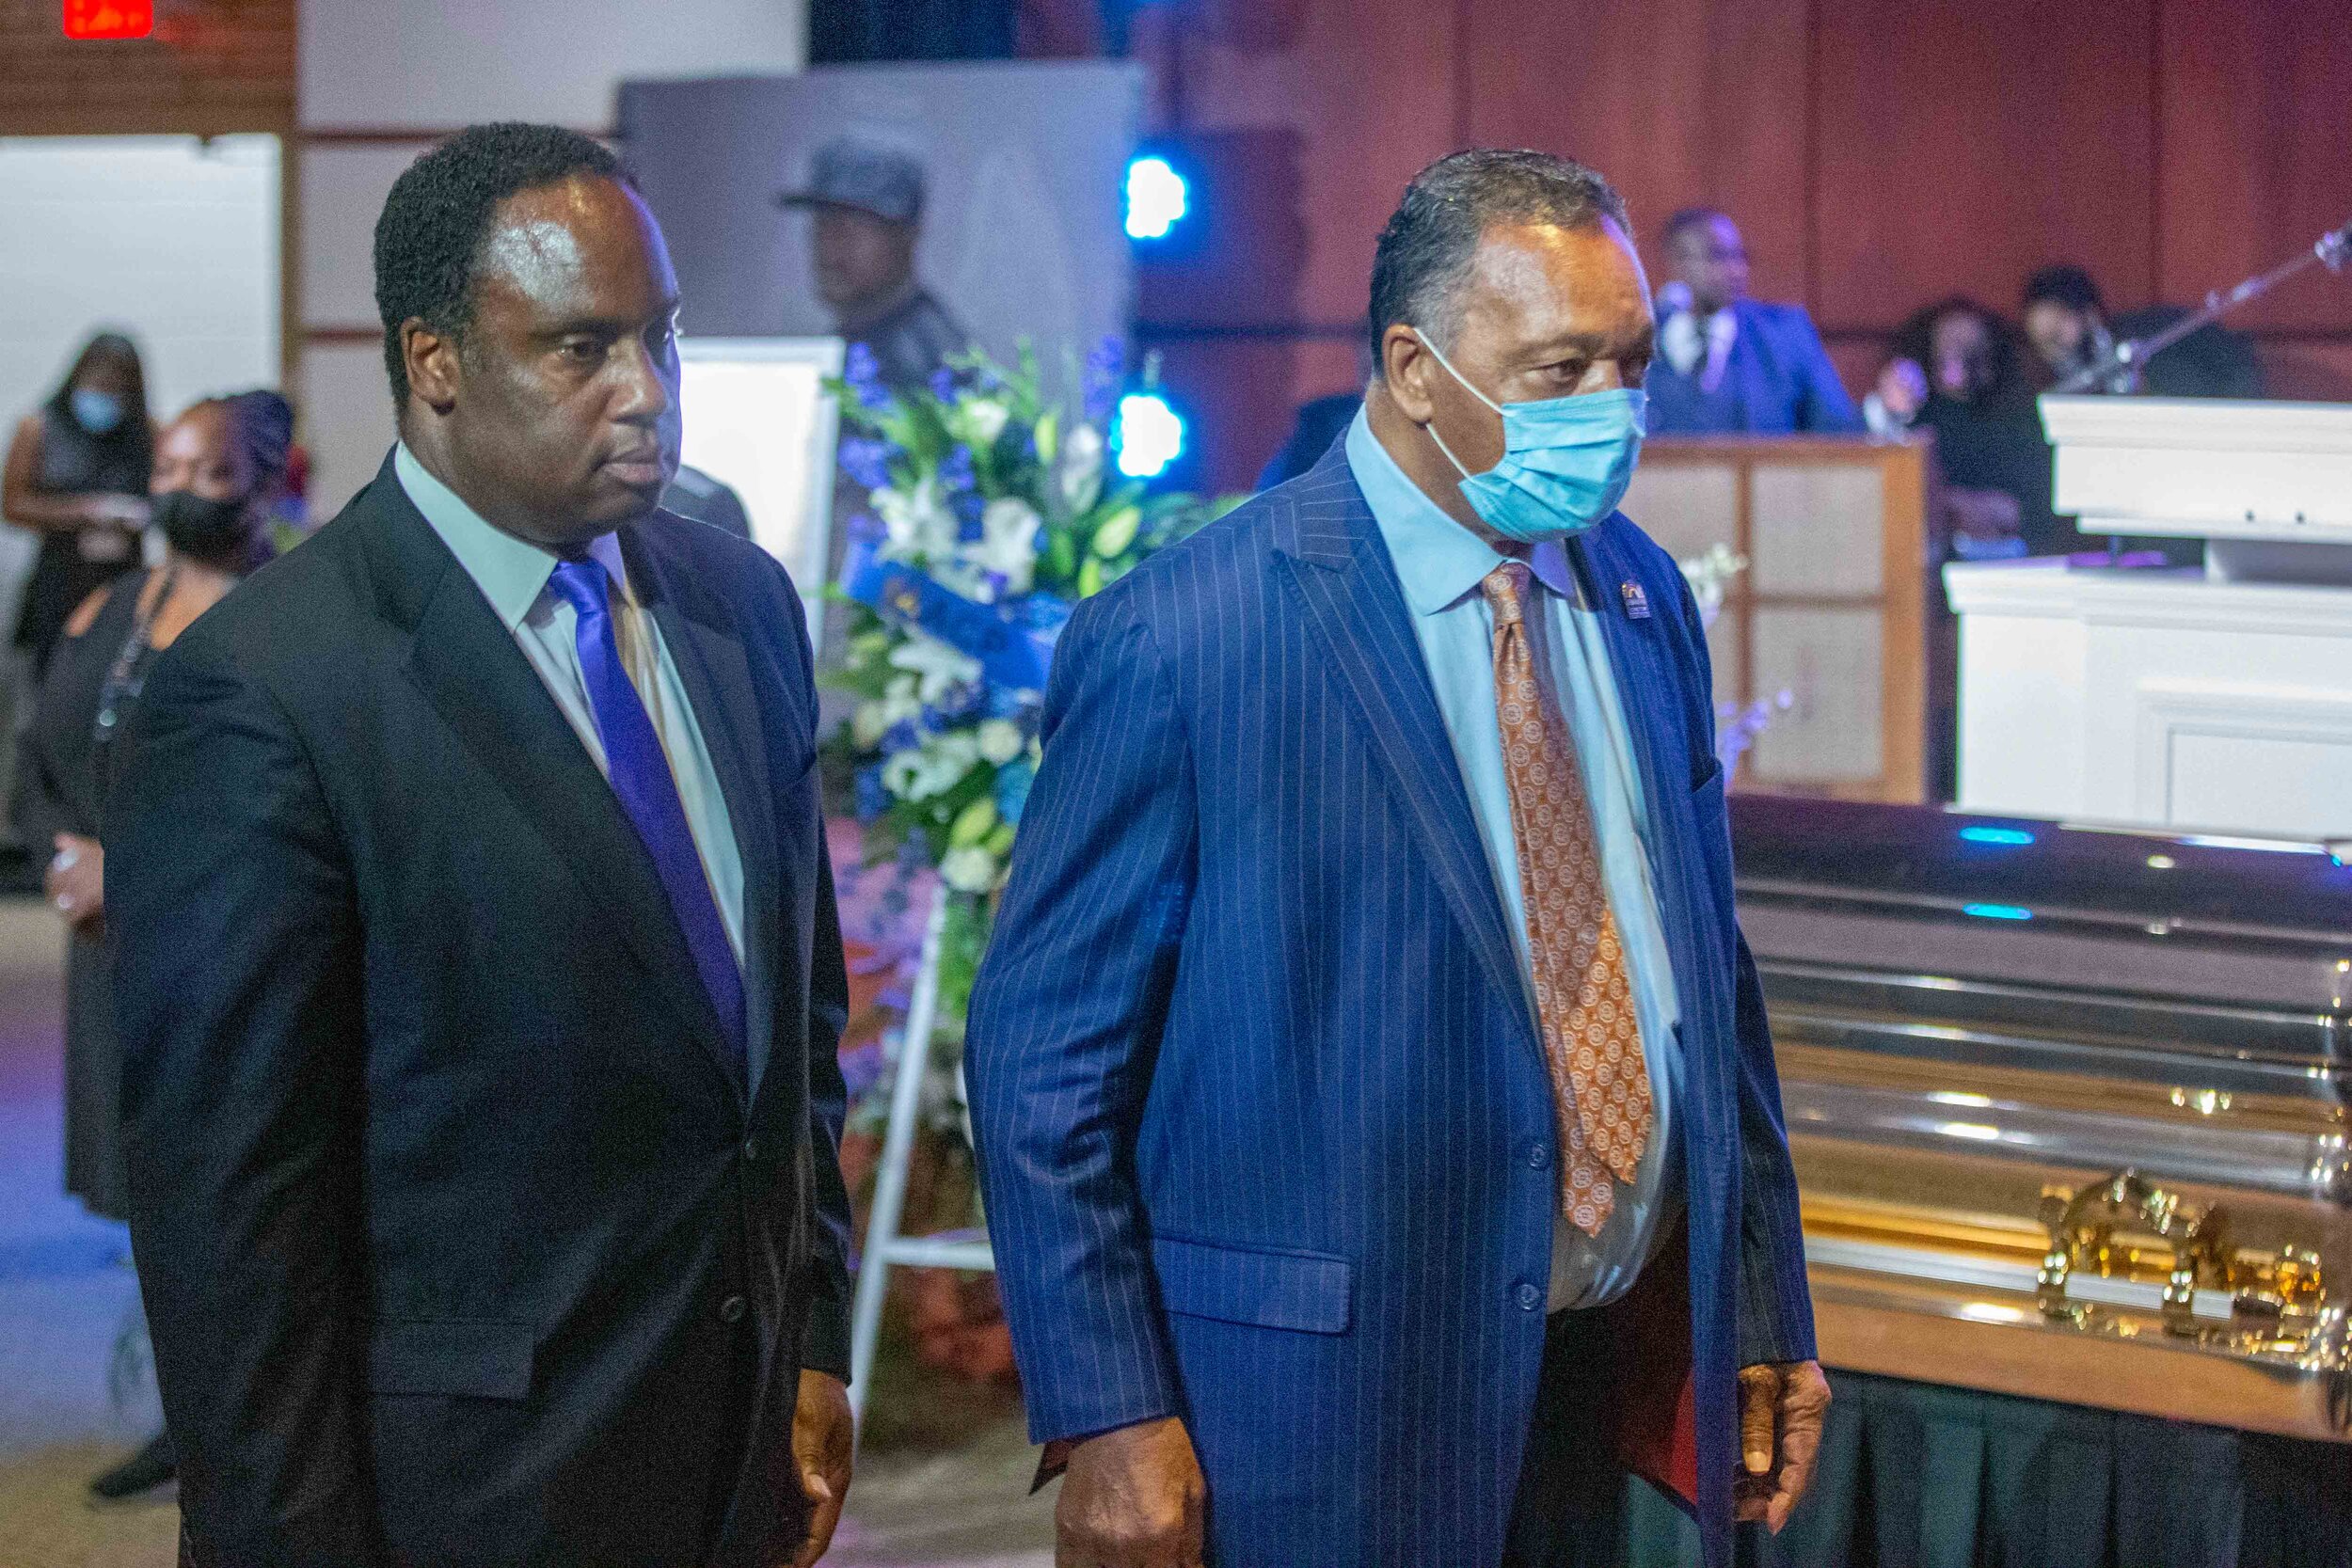  Rev. Jesse Jackson (right) and his son Jonathan Jackson take their seat at the memorial for George Floyd at North Central University in Minneapolis, Minnesota on Jun 4, 2020. 